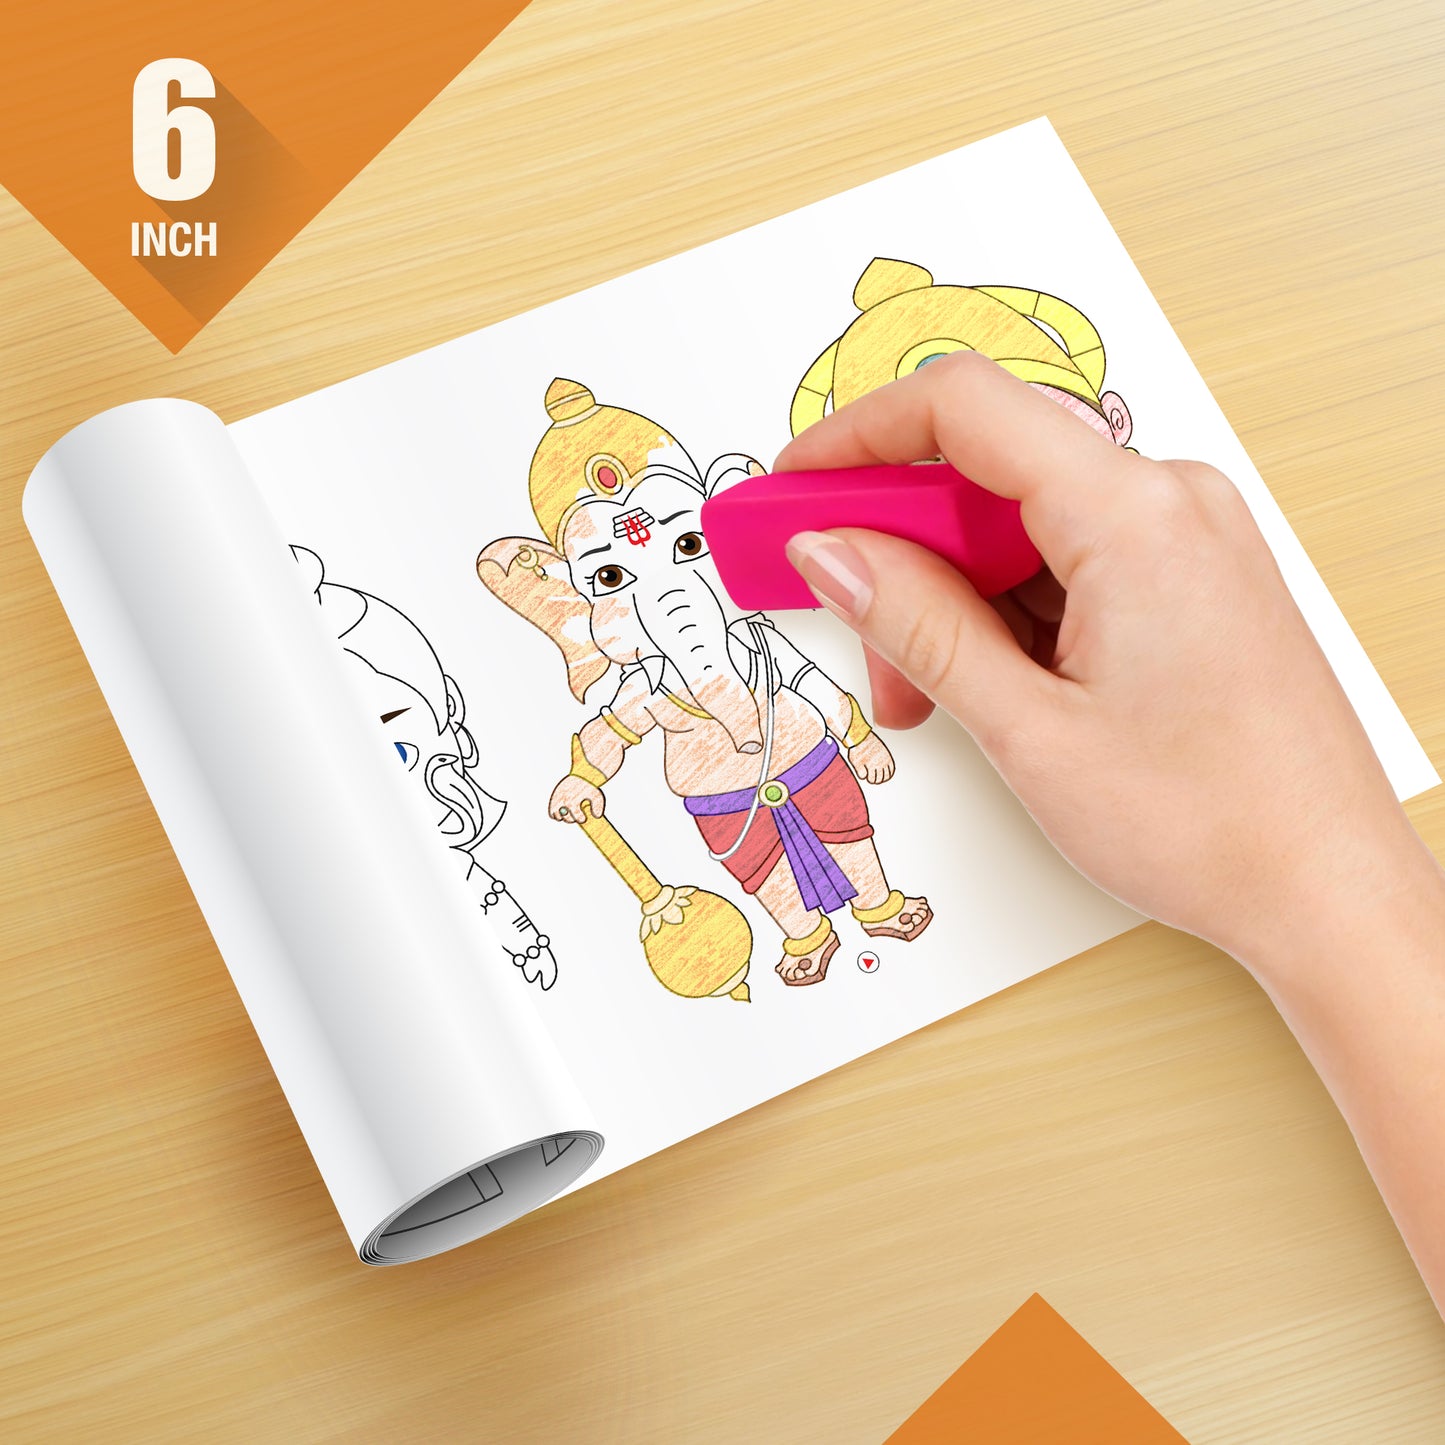 The image depicts a hand using an eraser to erase crayon marks in a colouring sheet